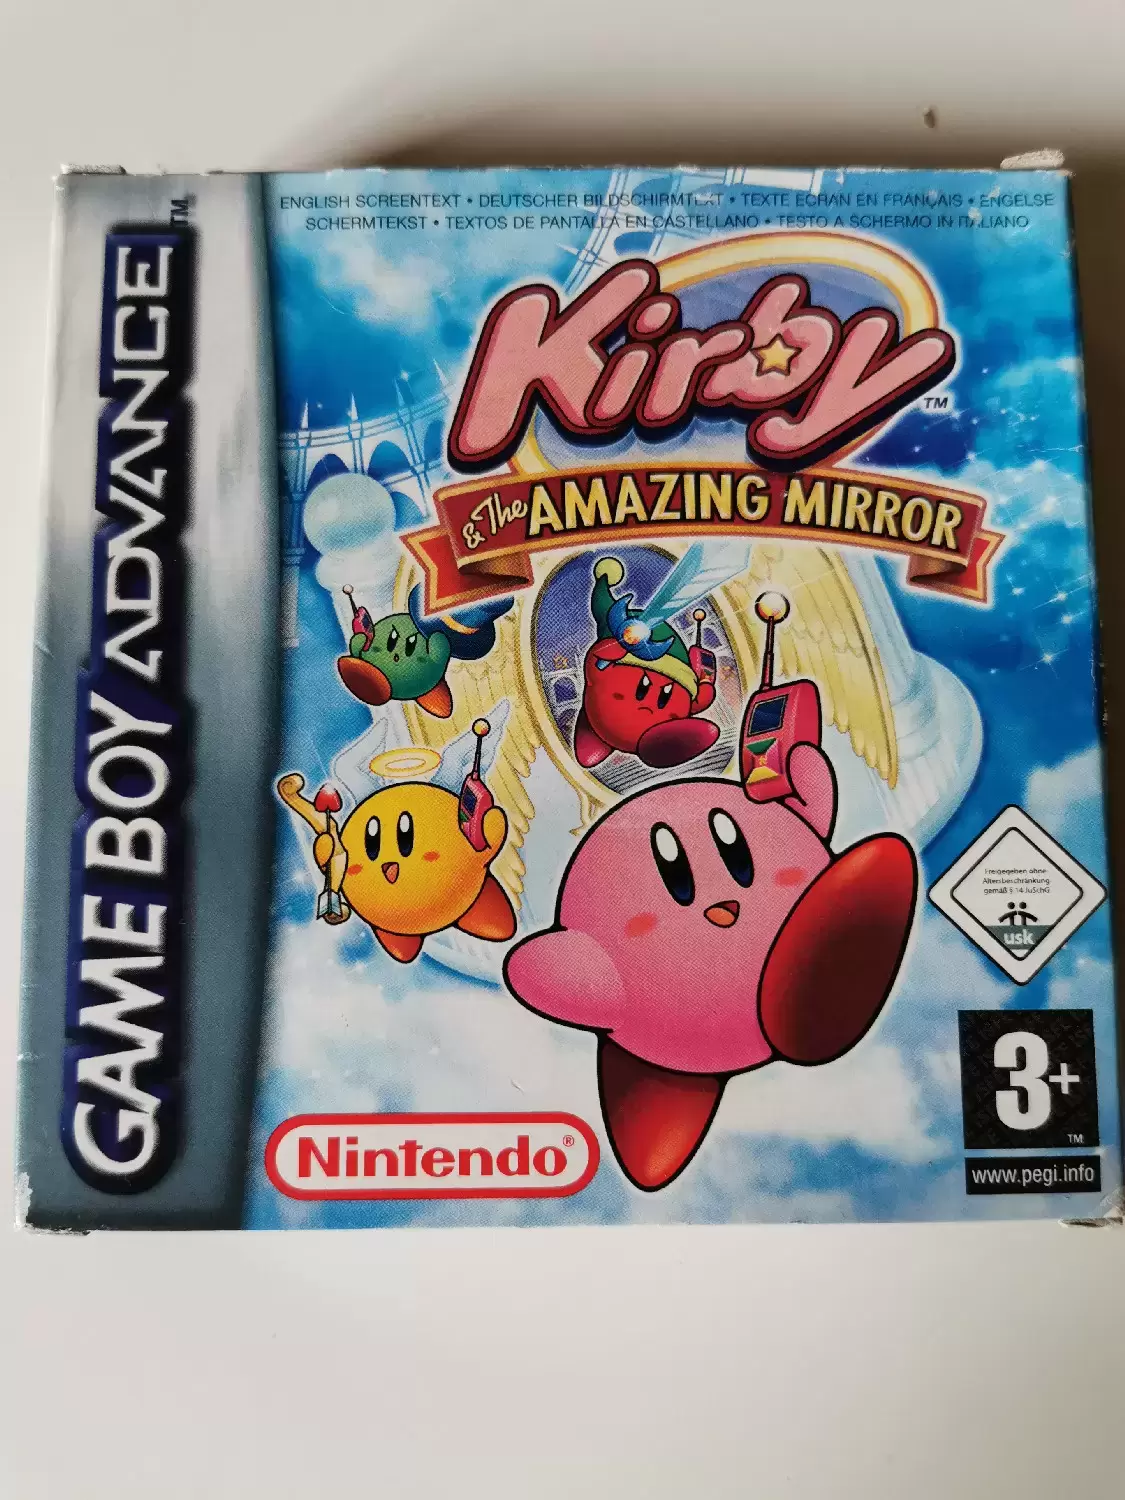 Game Boy Advance Games - Kirby & The Amazing Mirror